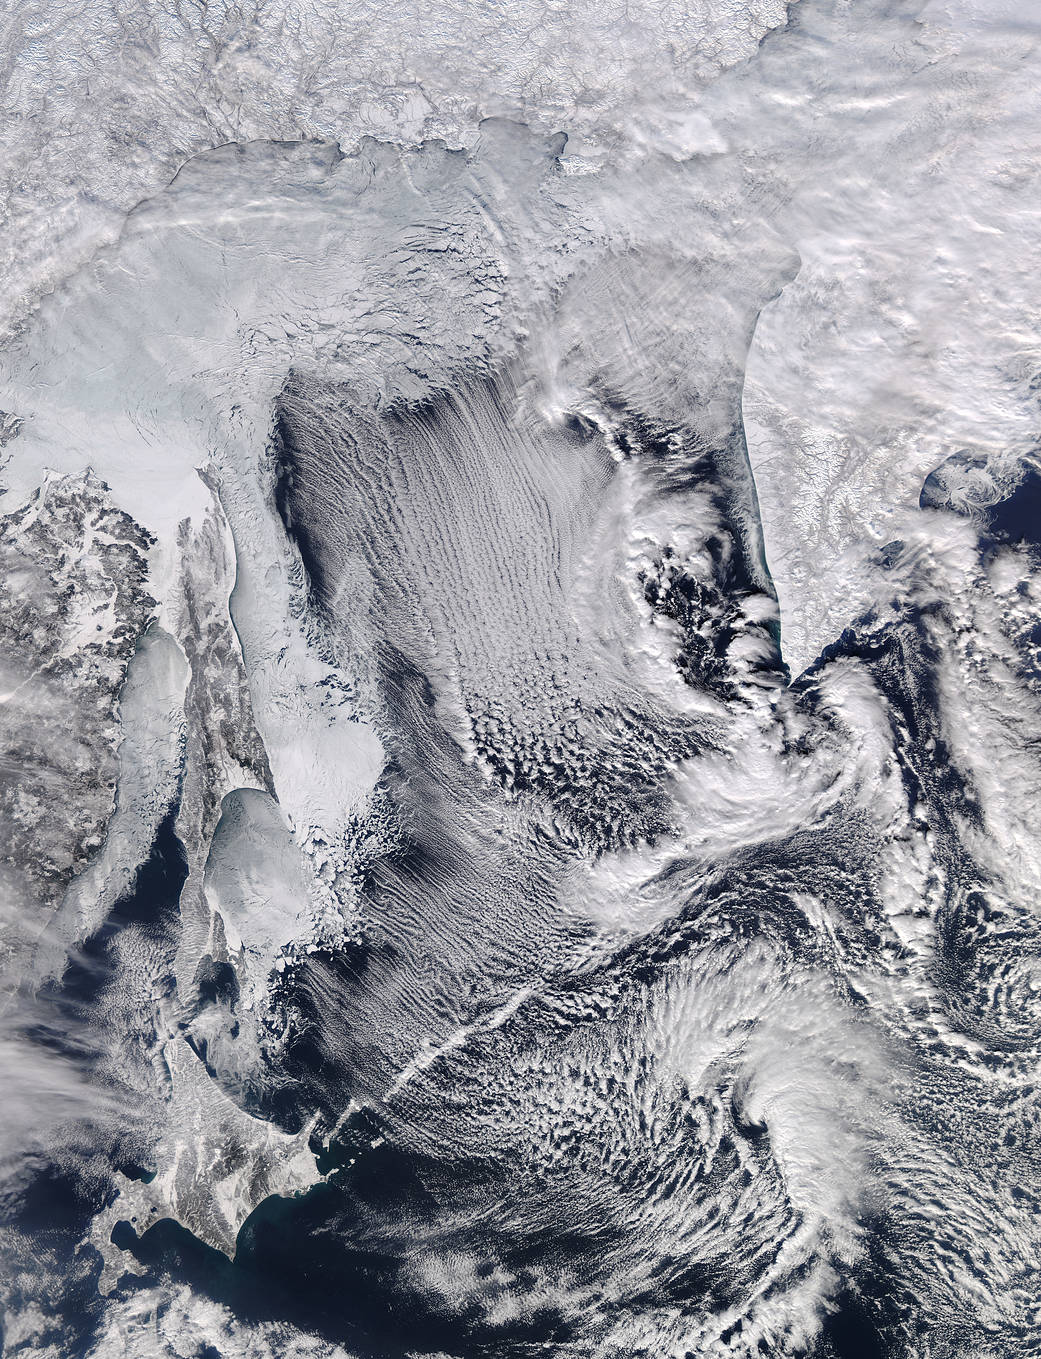 White parallel bands of clouds and snow covered sea ice imaged from satellite in orbit